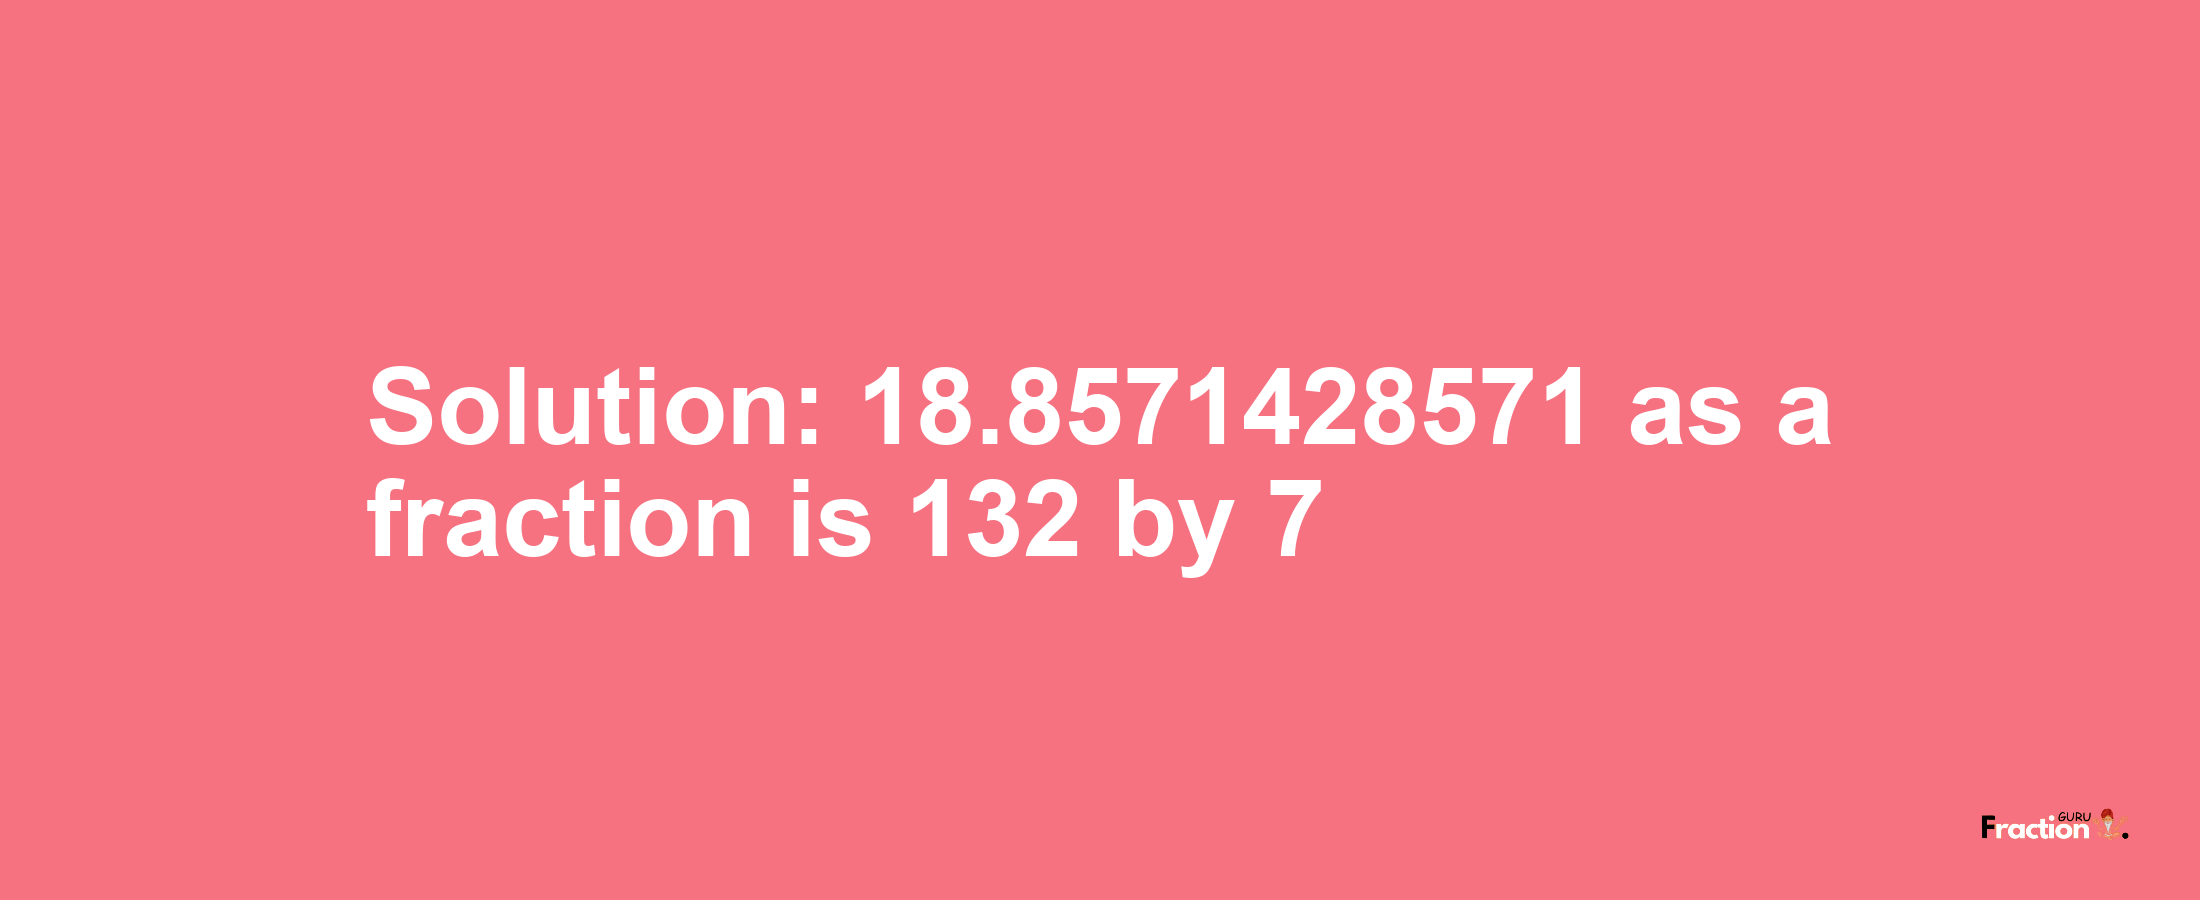 Solution:18.8571428571 as a fraction is 132/7